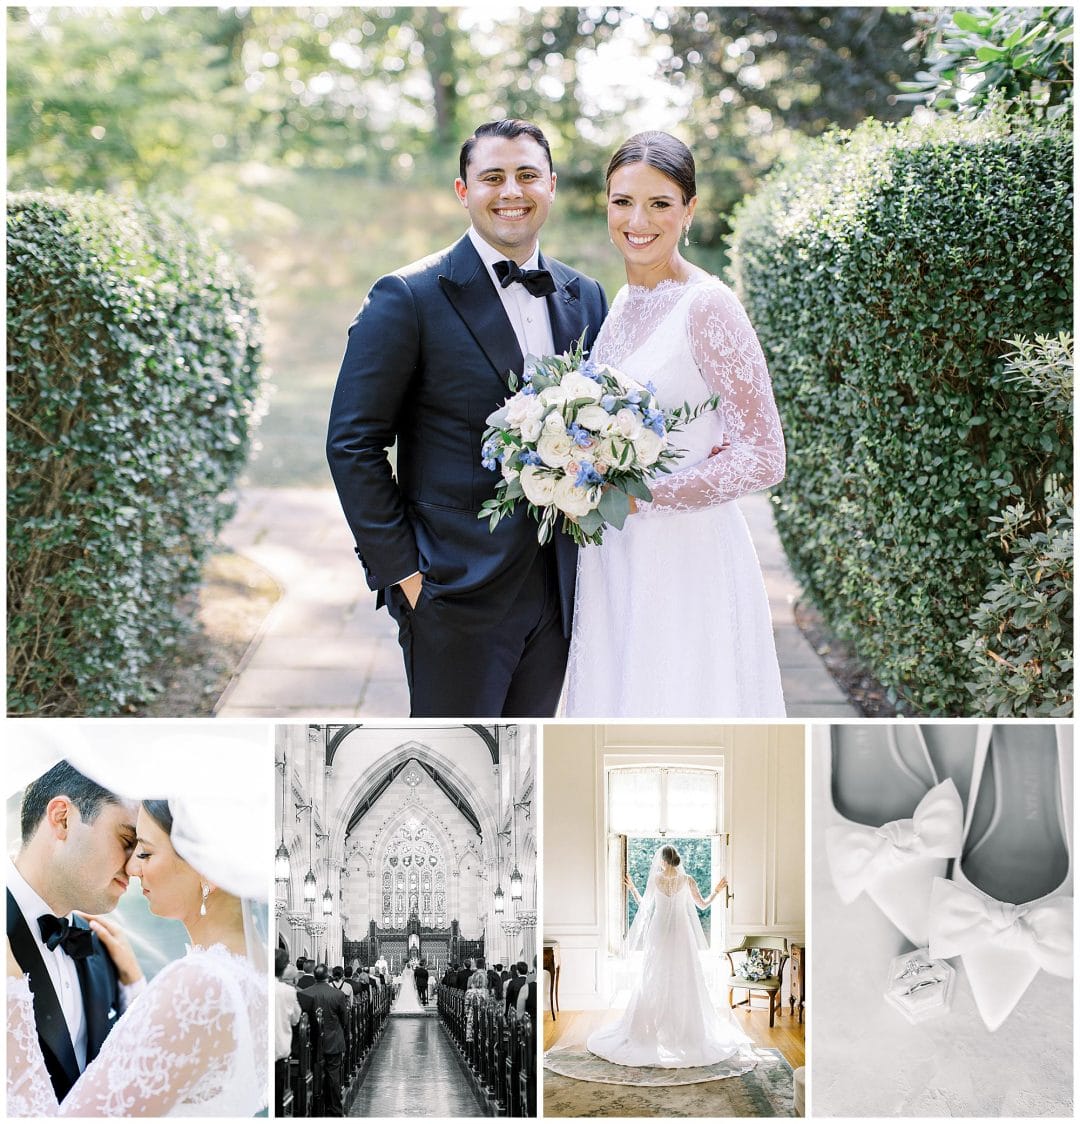 An elegant Chateau Wedding at the Glen Manor House